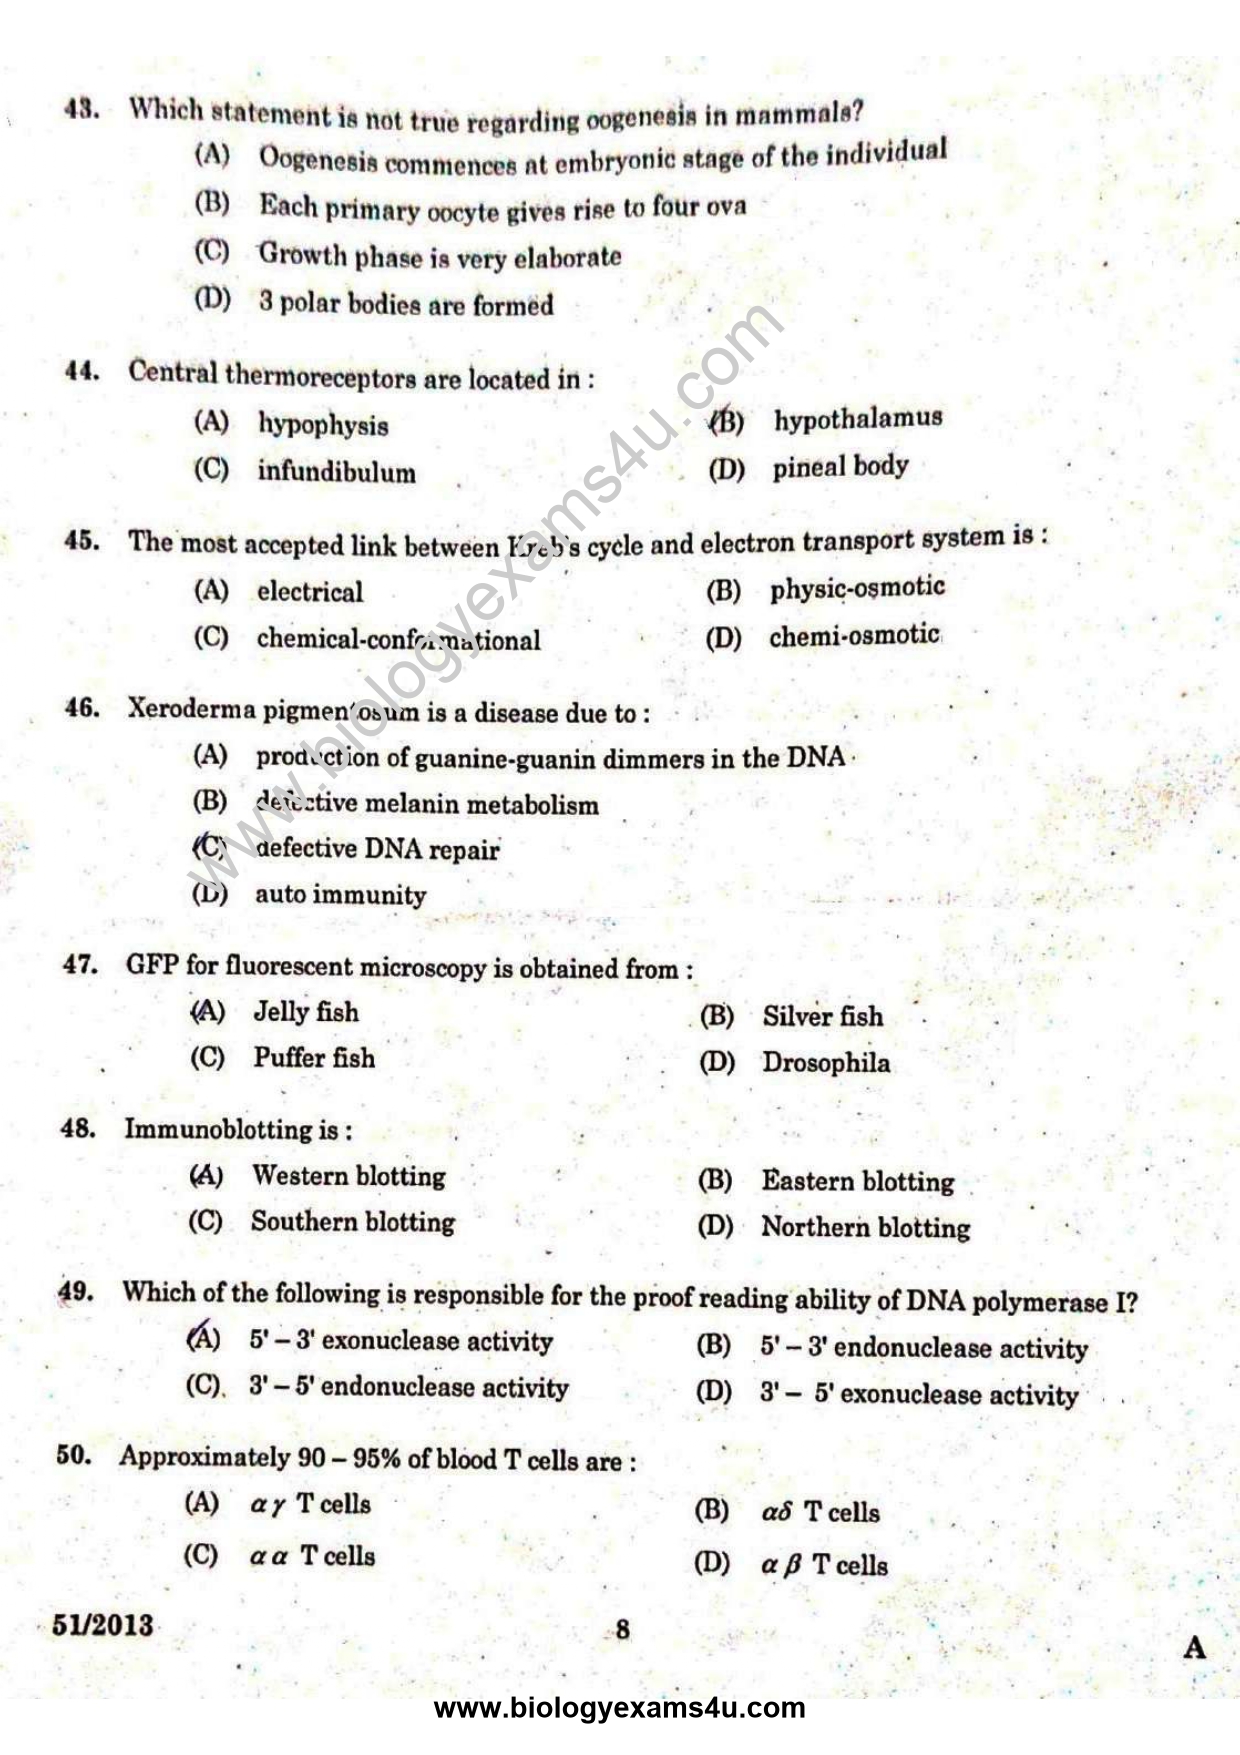 Scientific Officer Biology - Question Paper with Answer Key 51/2013